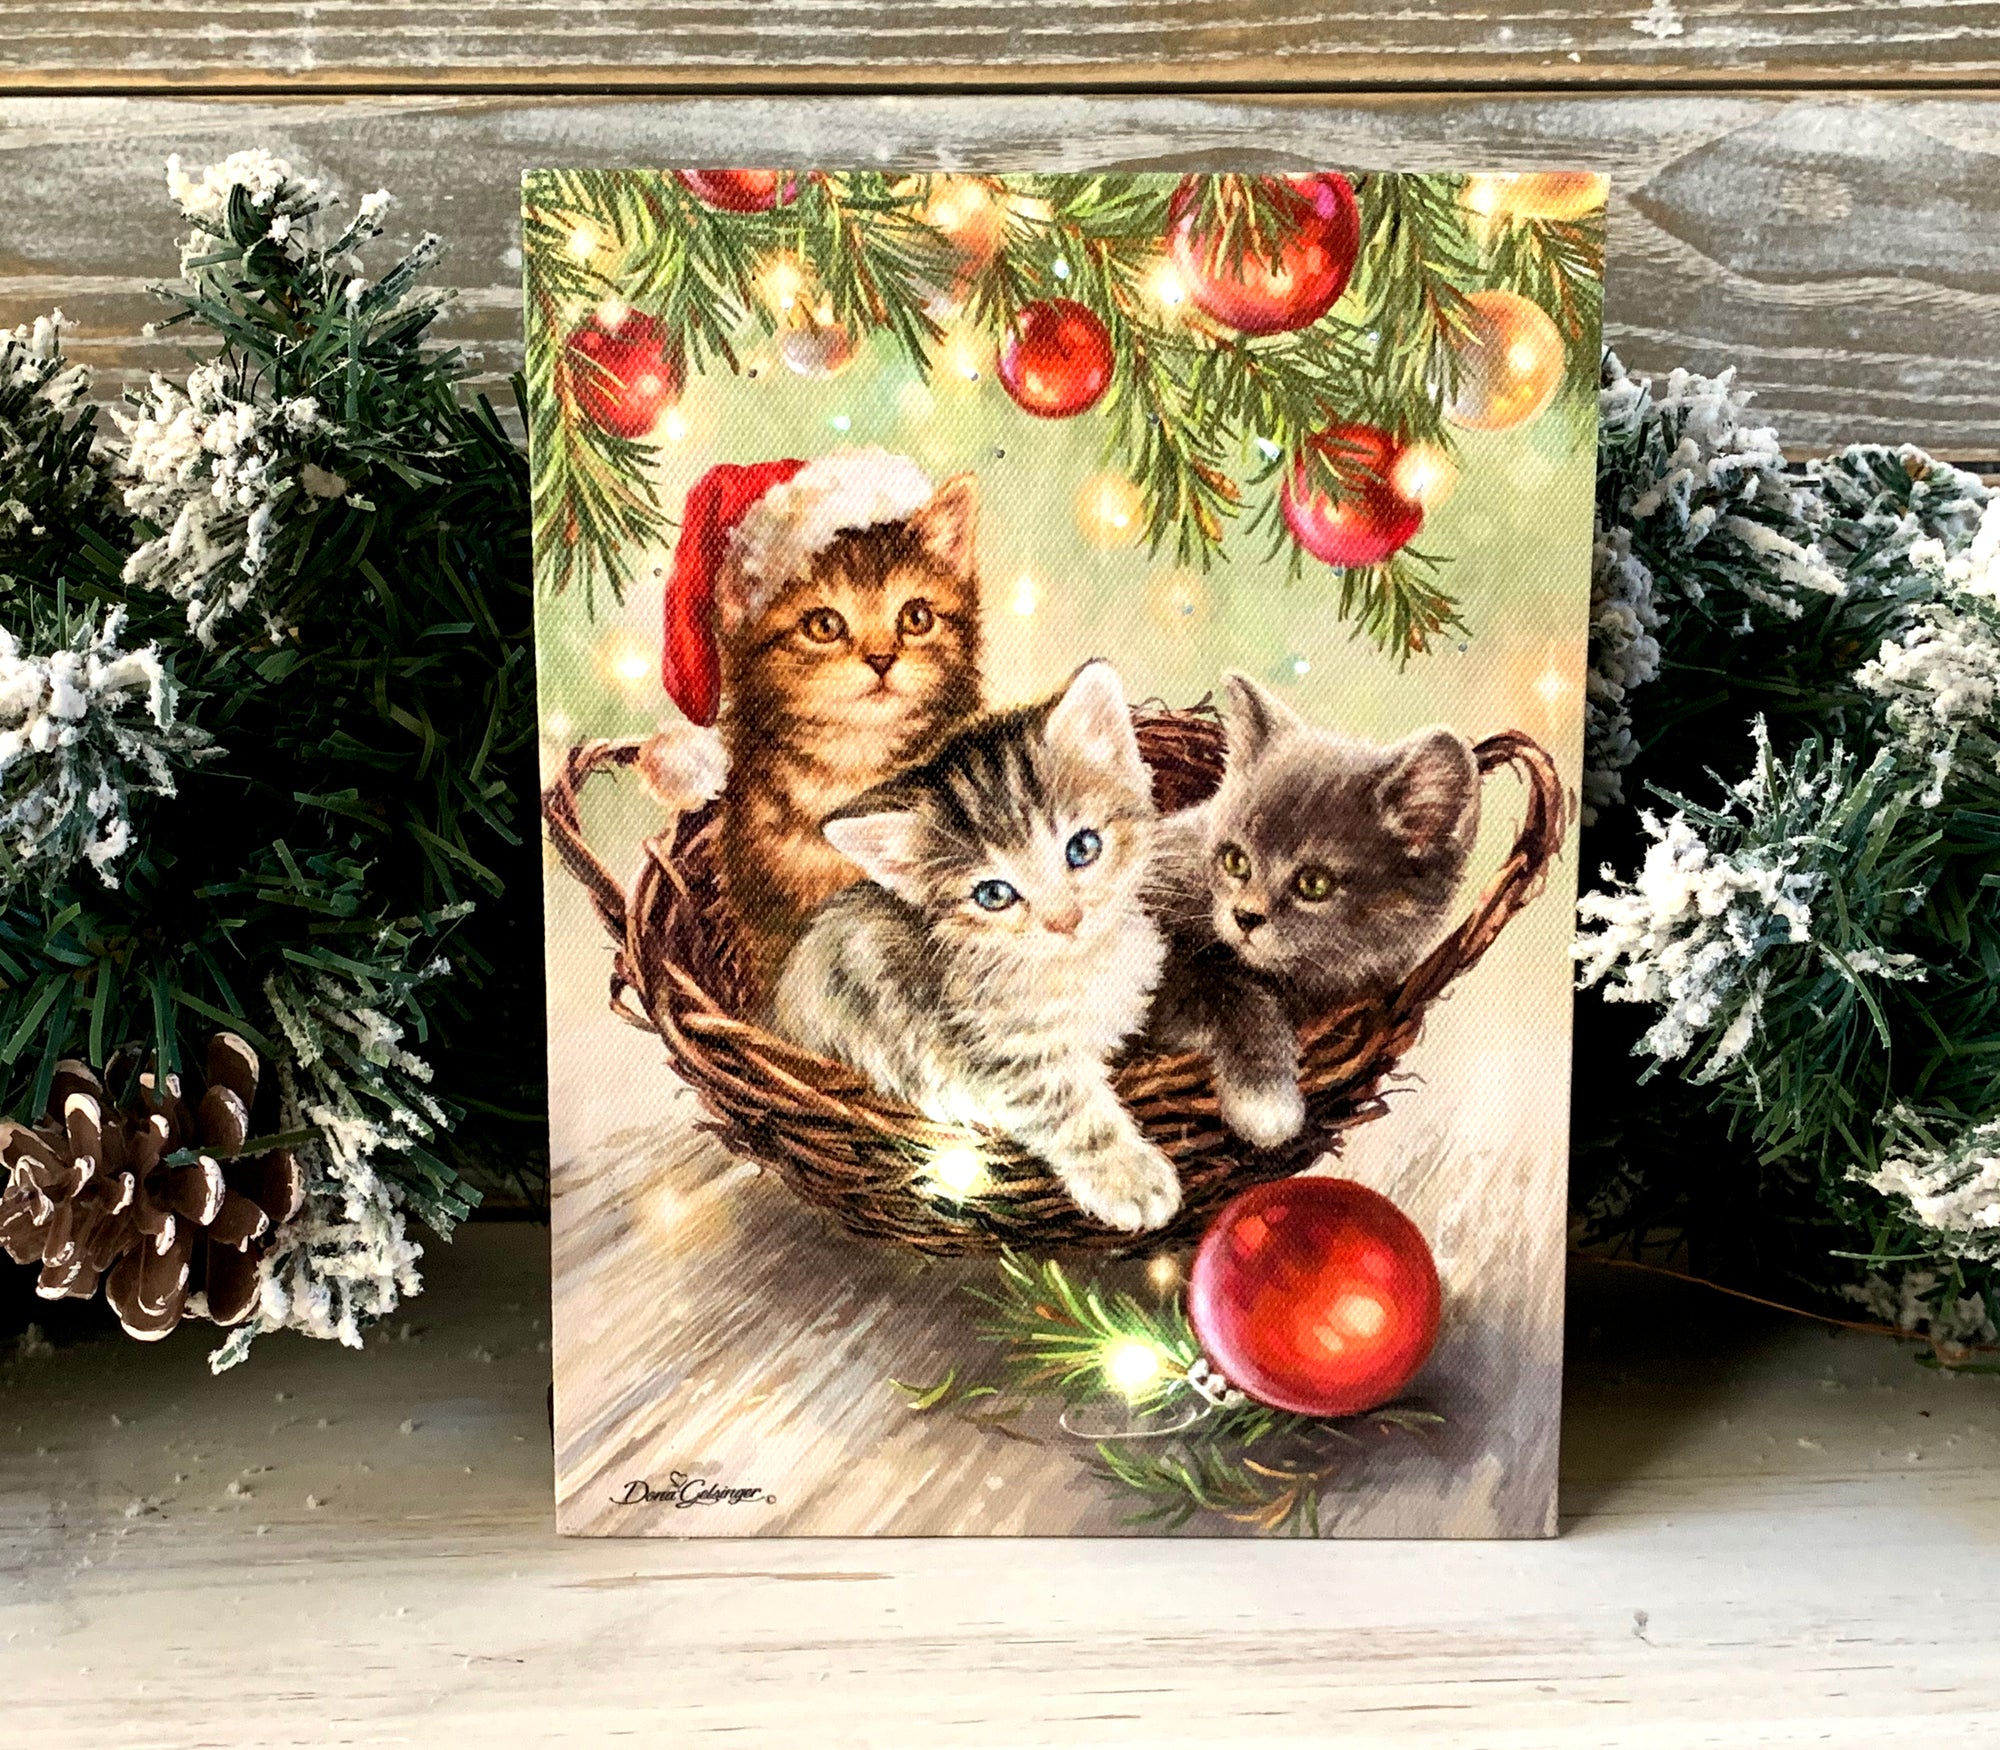 Three playful kittens snuggled up in a cozy woven basket, one of them donning a cute Santa hat, are sure to steal your heart.  As you gaze at the adorable scene, the mesmerizing bottom of a Christmas tree, adorned with twinkling lights and colorful bulbs, illuminates the canvas with a warm and inviting glow.